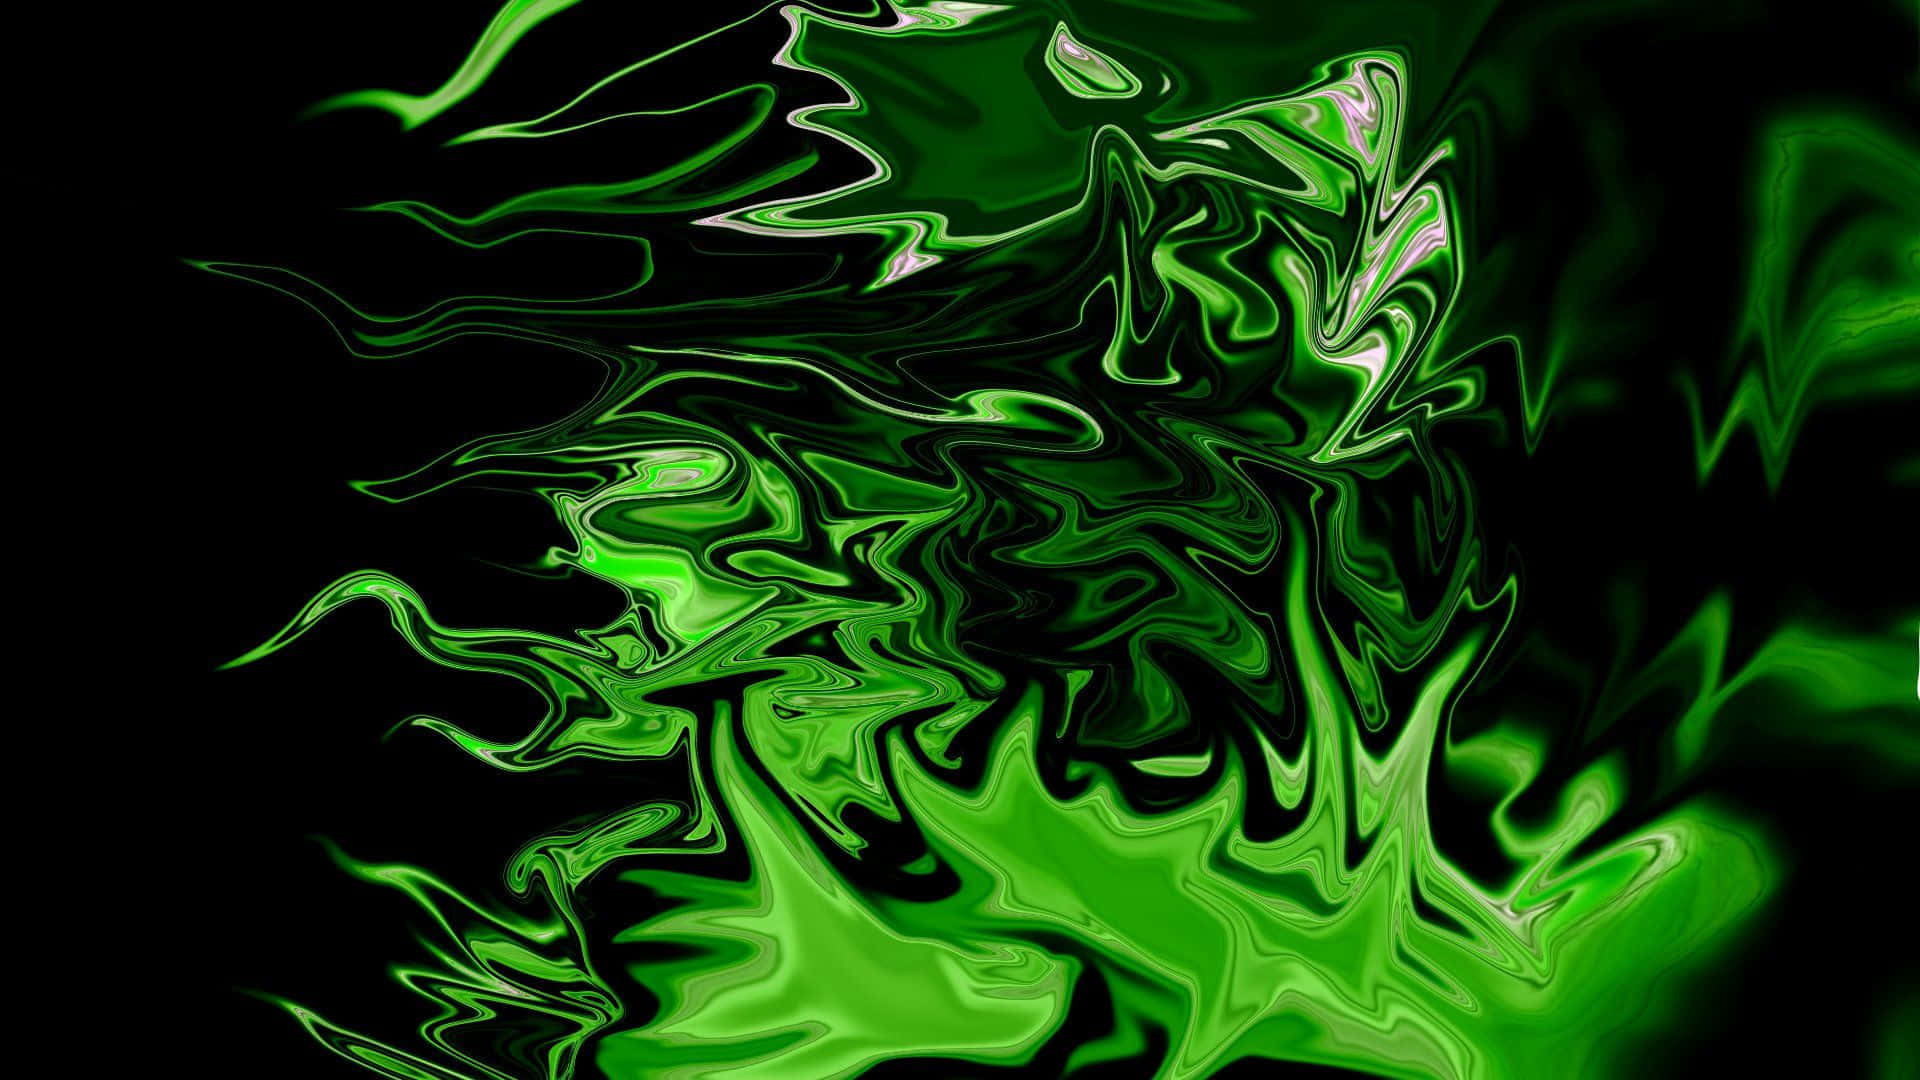 Green Led Abstract Art Forms Wallpaper